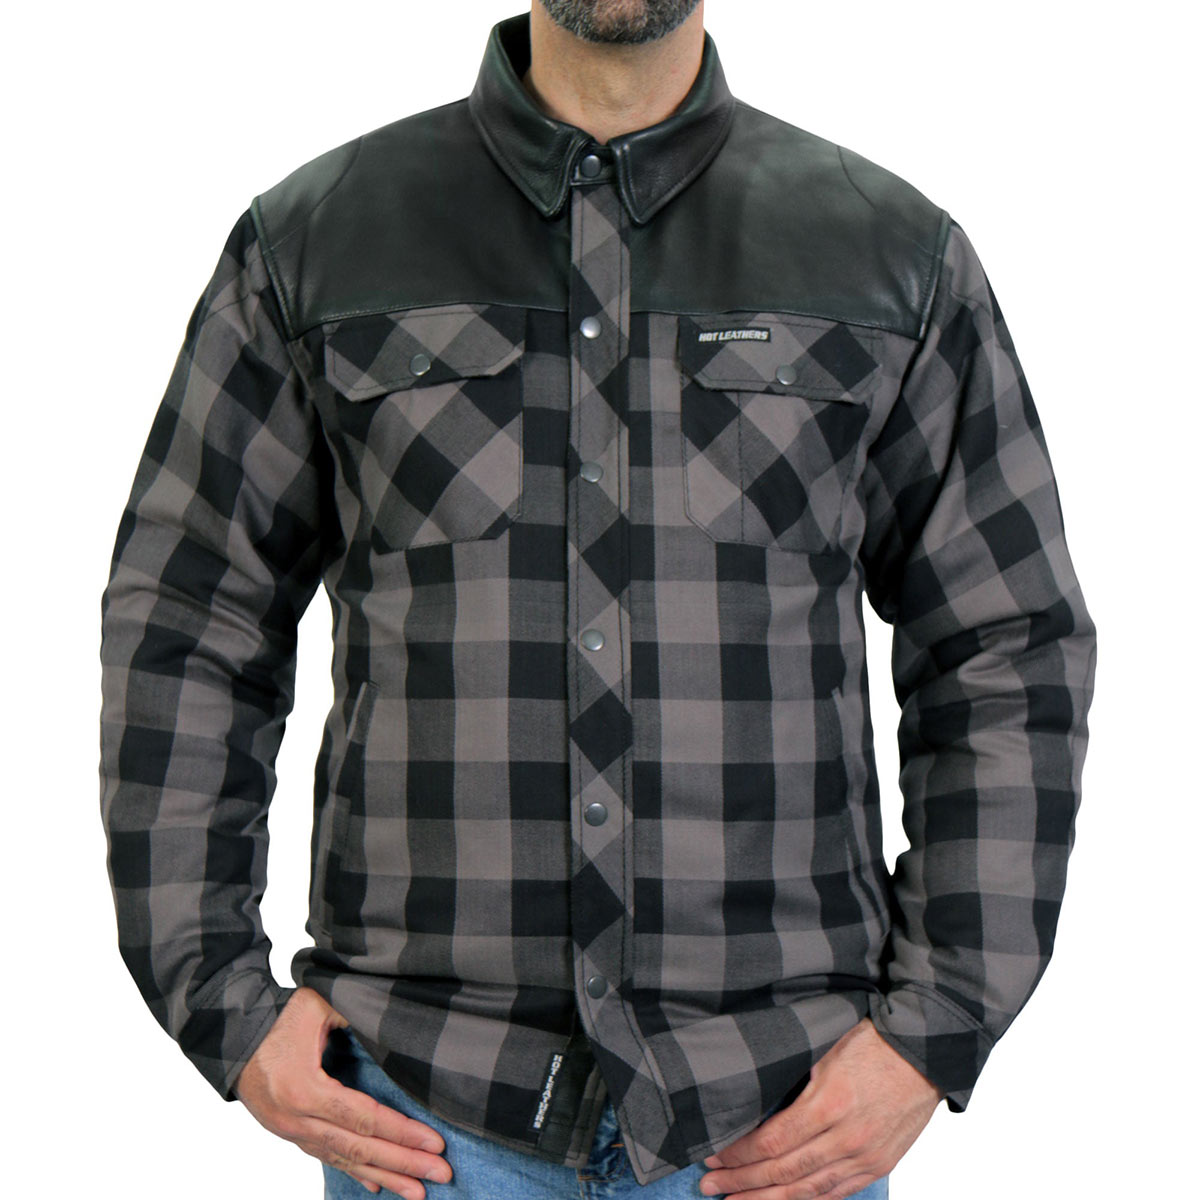 Hot Leathers JKM3203 Men's Grey and Black Kevlar Reinforced Leather and Plaid Flannel Shirt